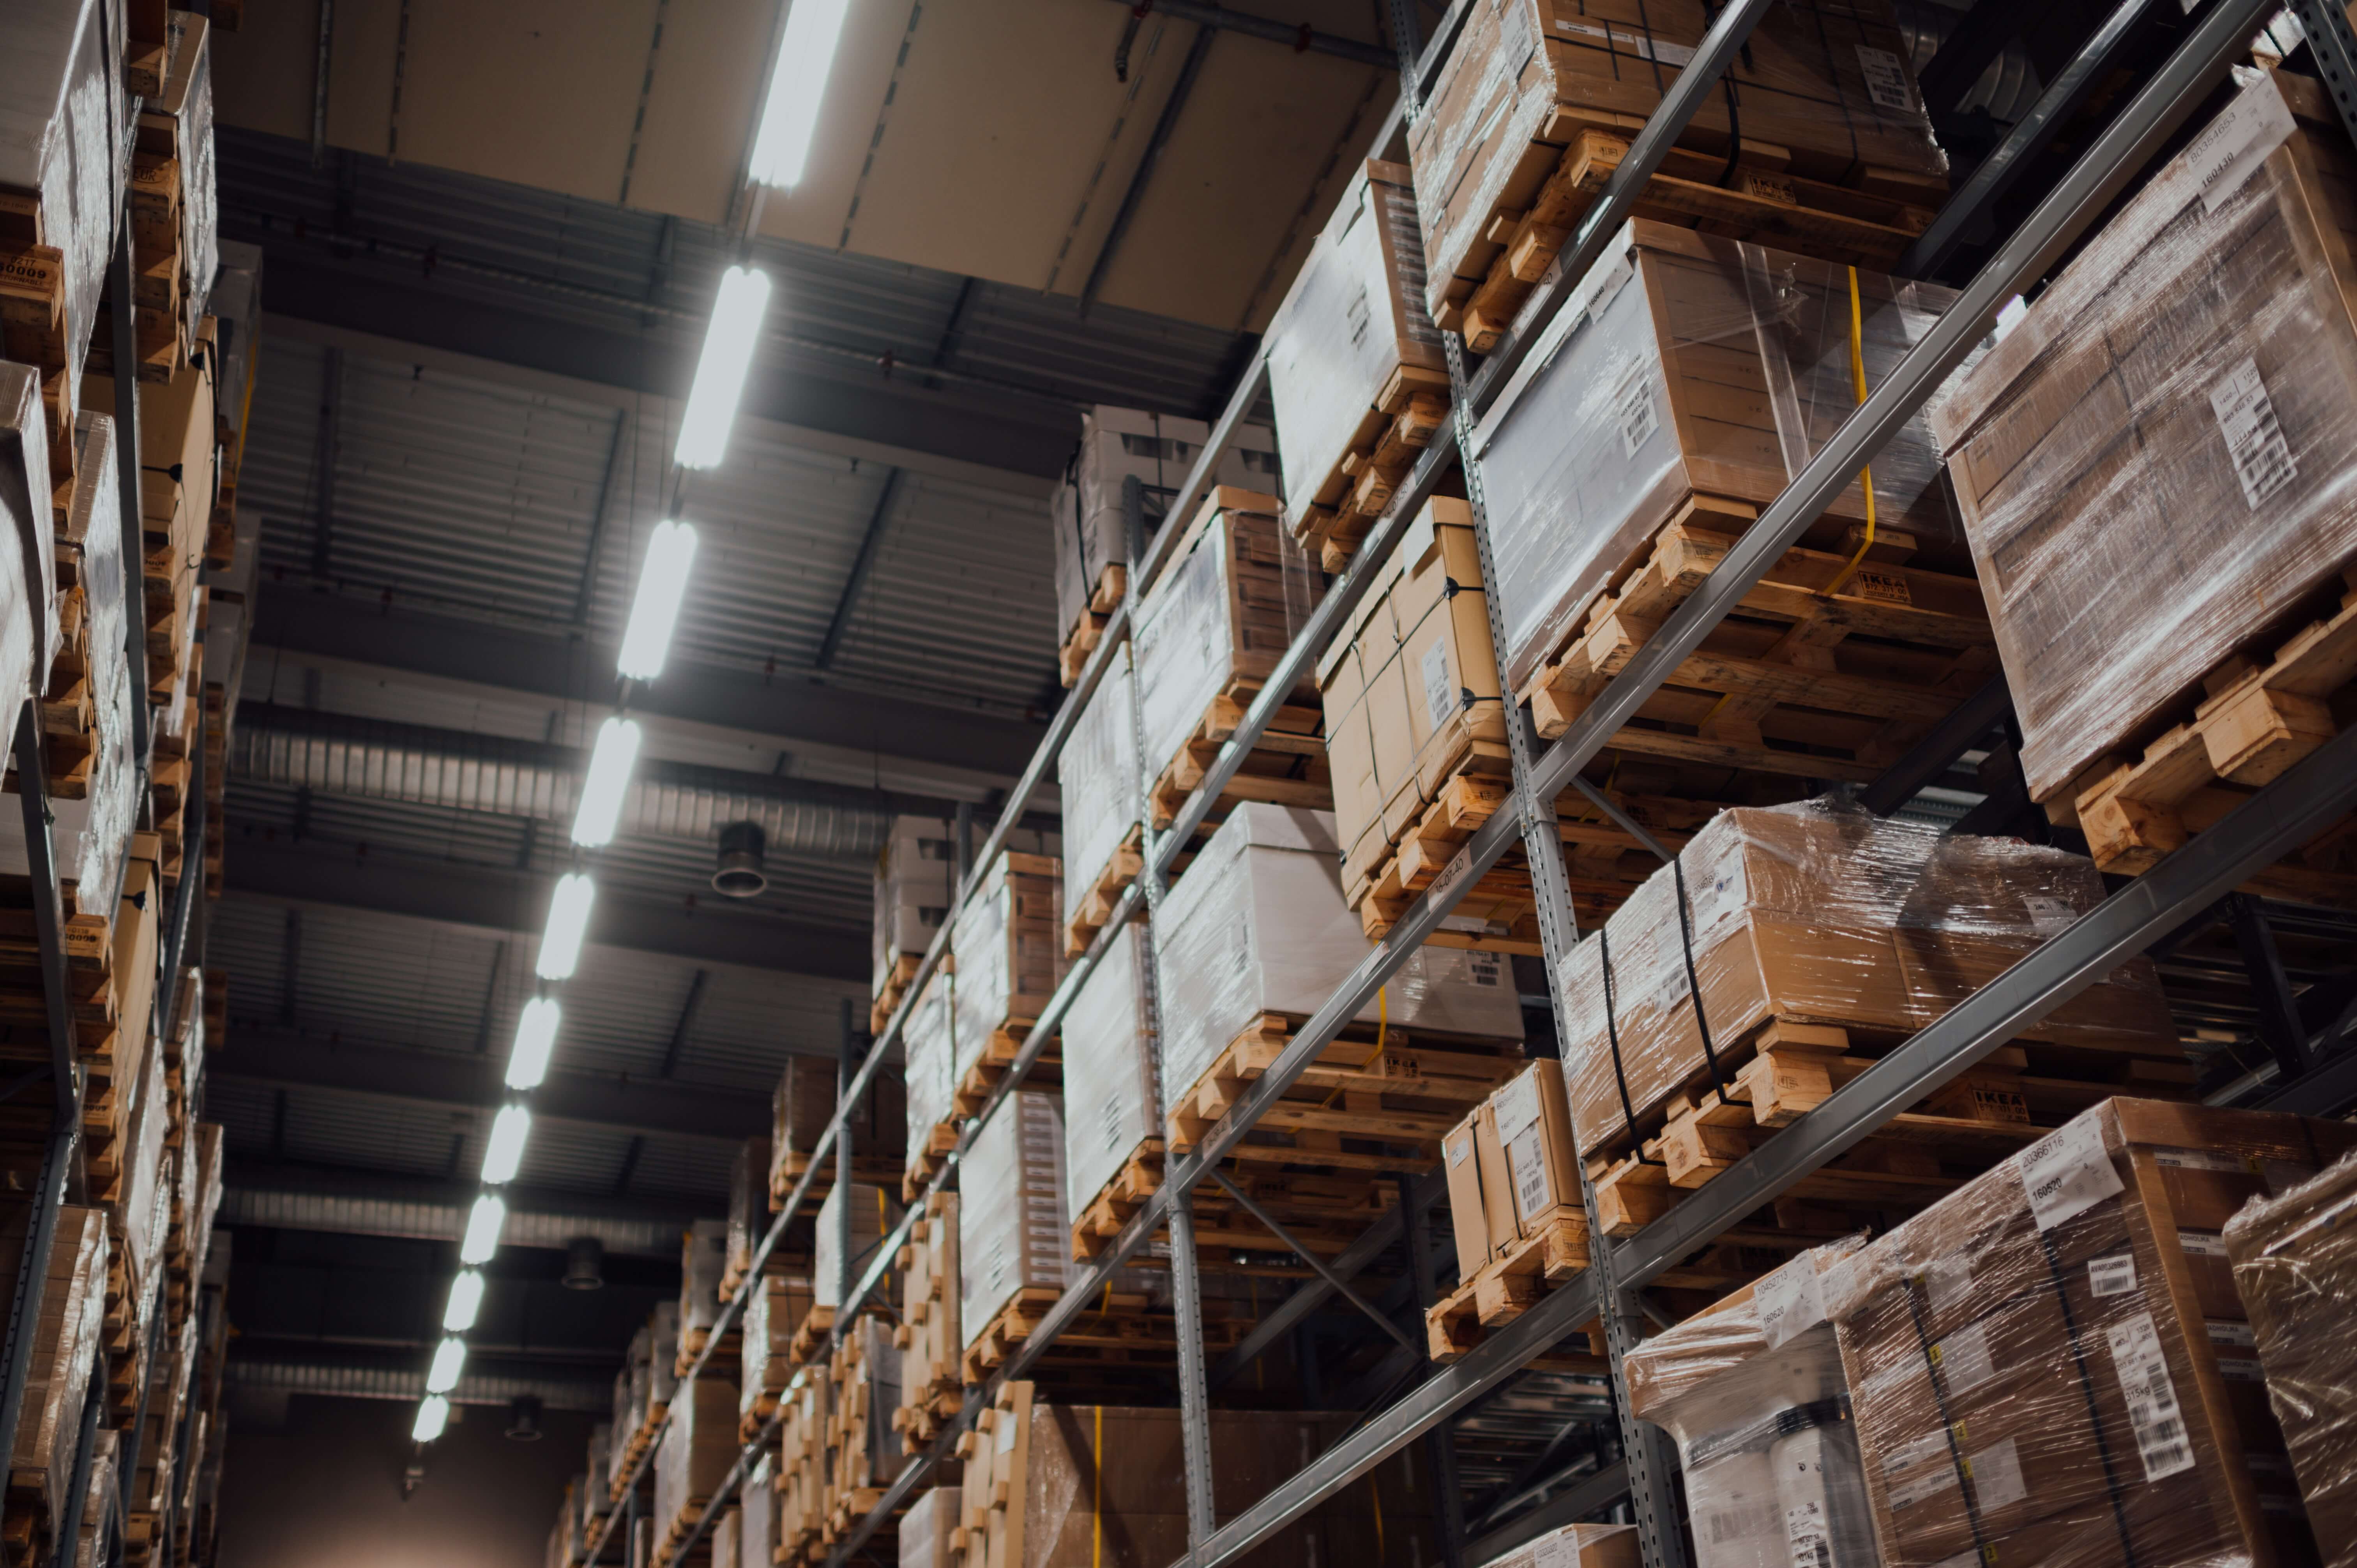 7 Inventory Management Metrics to Track and Improve Business Operations